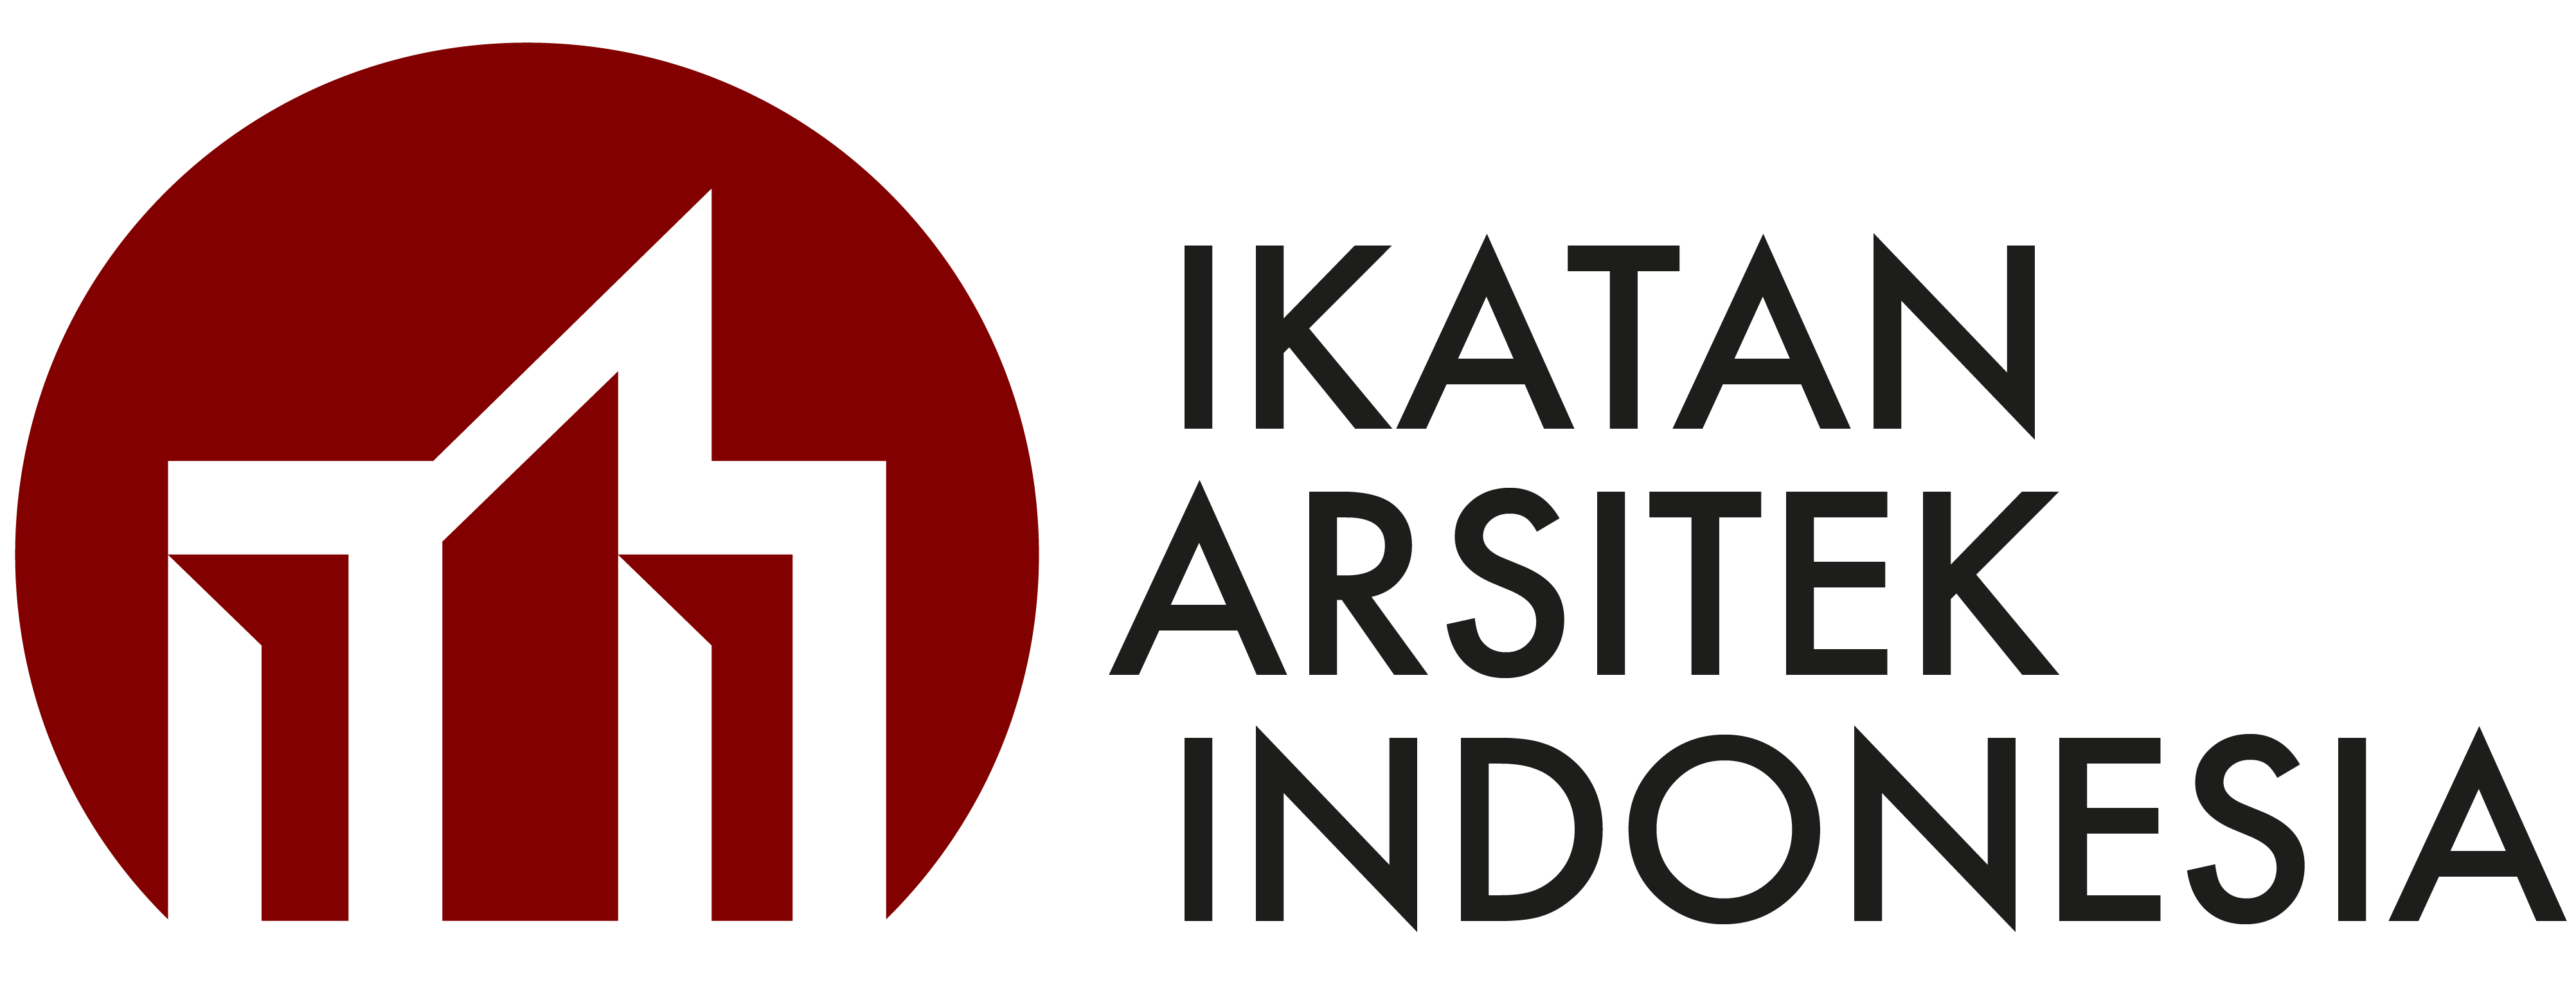 Indonesian Institute of Architects